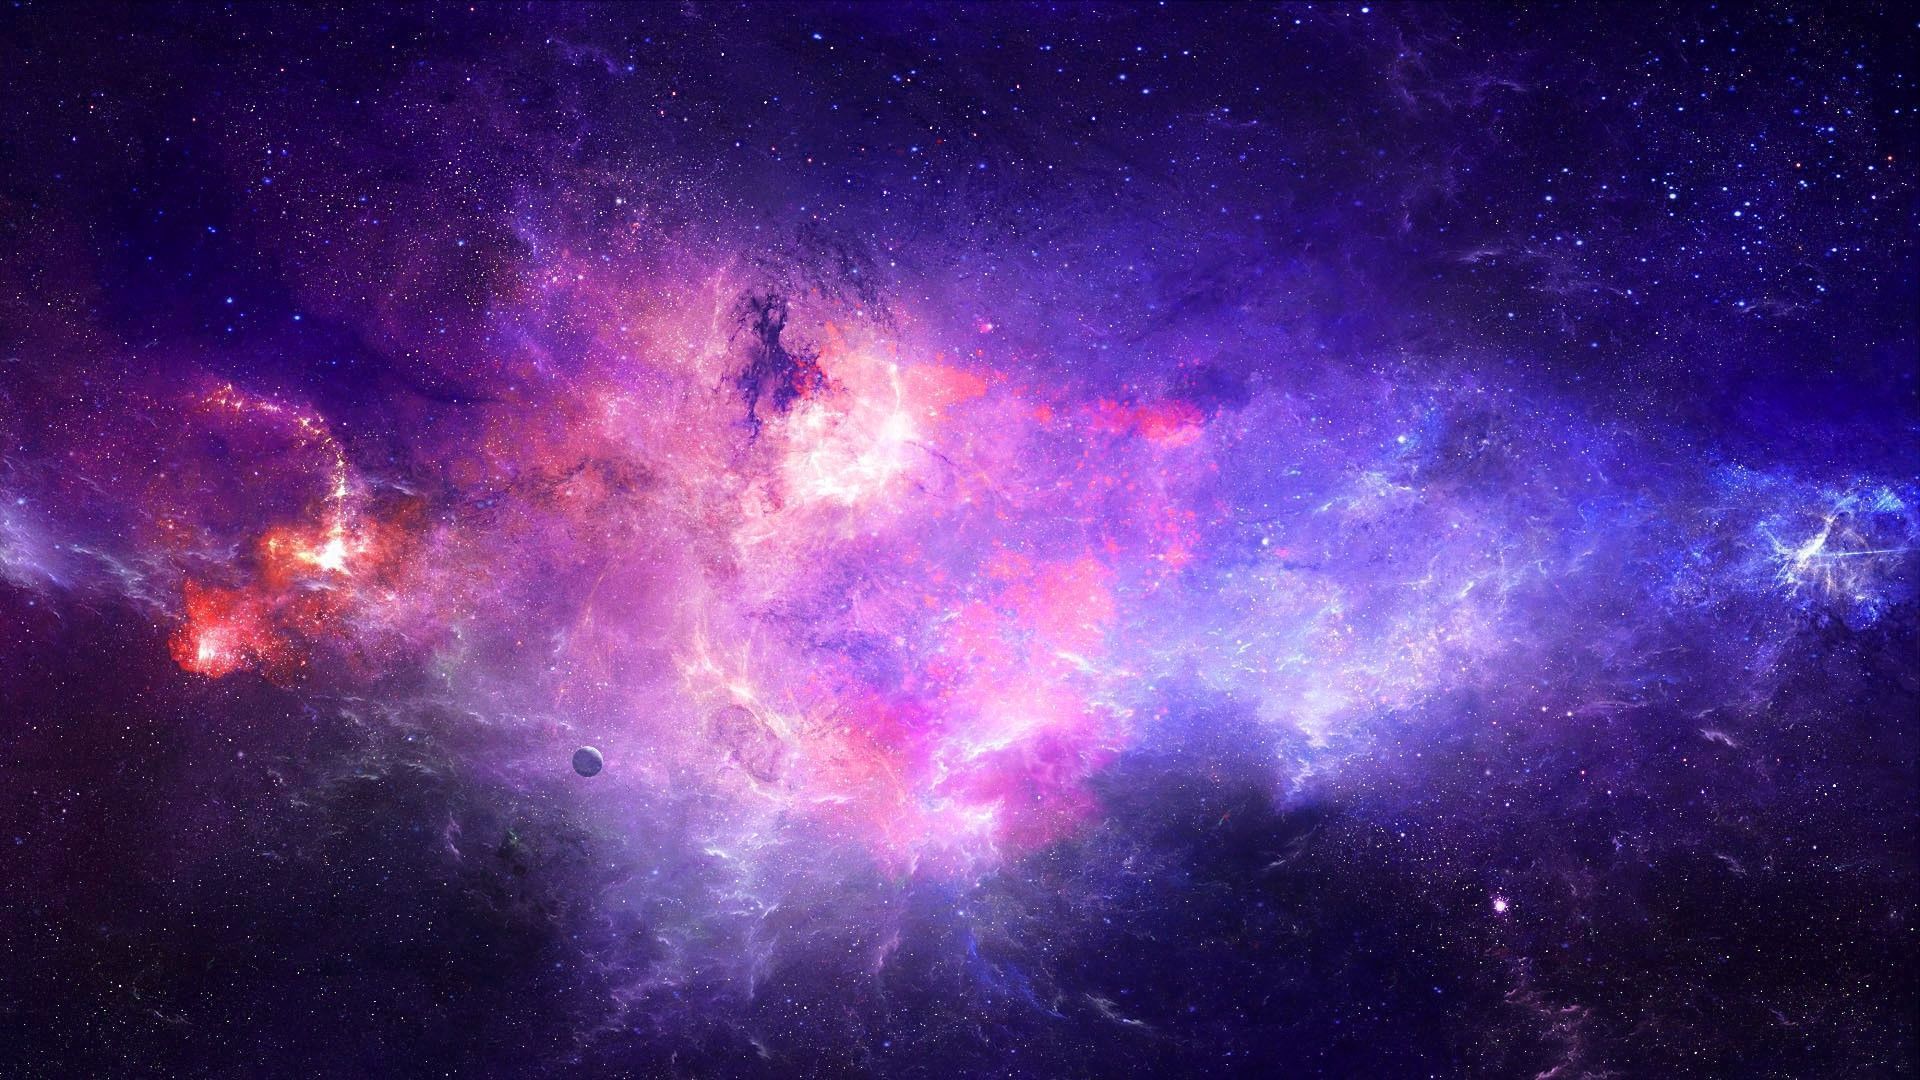 Blue Space Galaxy Wallpaper - Pics about space